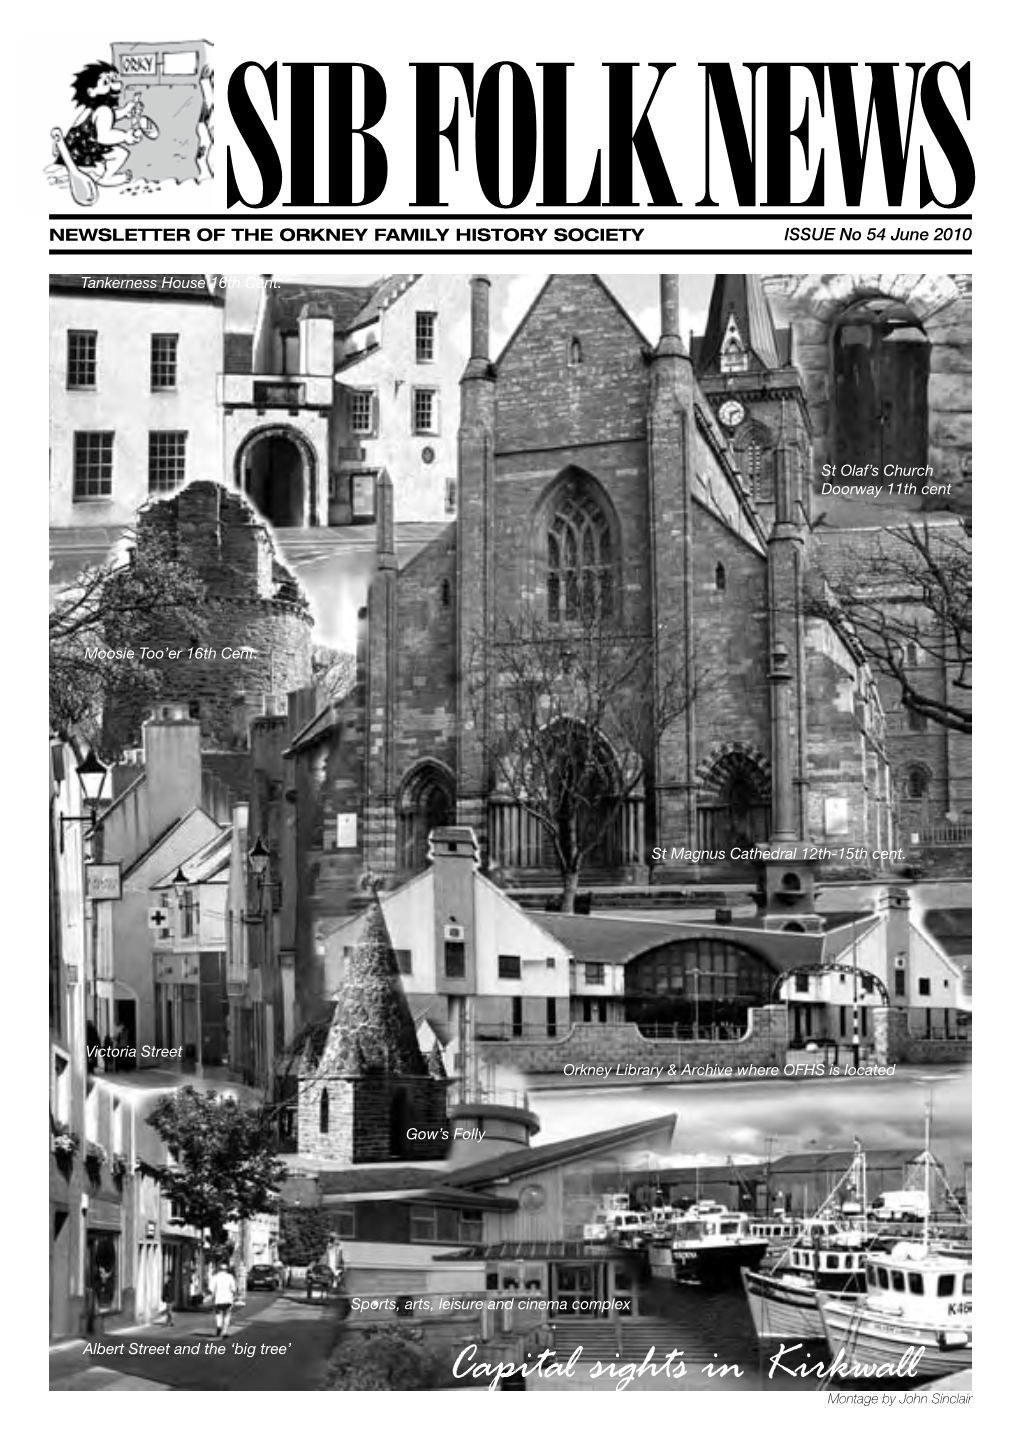 Capital Sights in Kirkwall Montage by John Sinclair 2 NEWSLETTER of the ORKNEY FAMILY HISTORY SOCIETY Issue No 54 June 2010